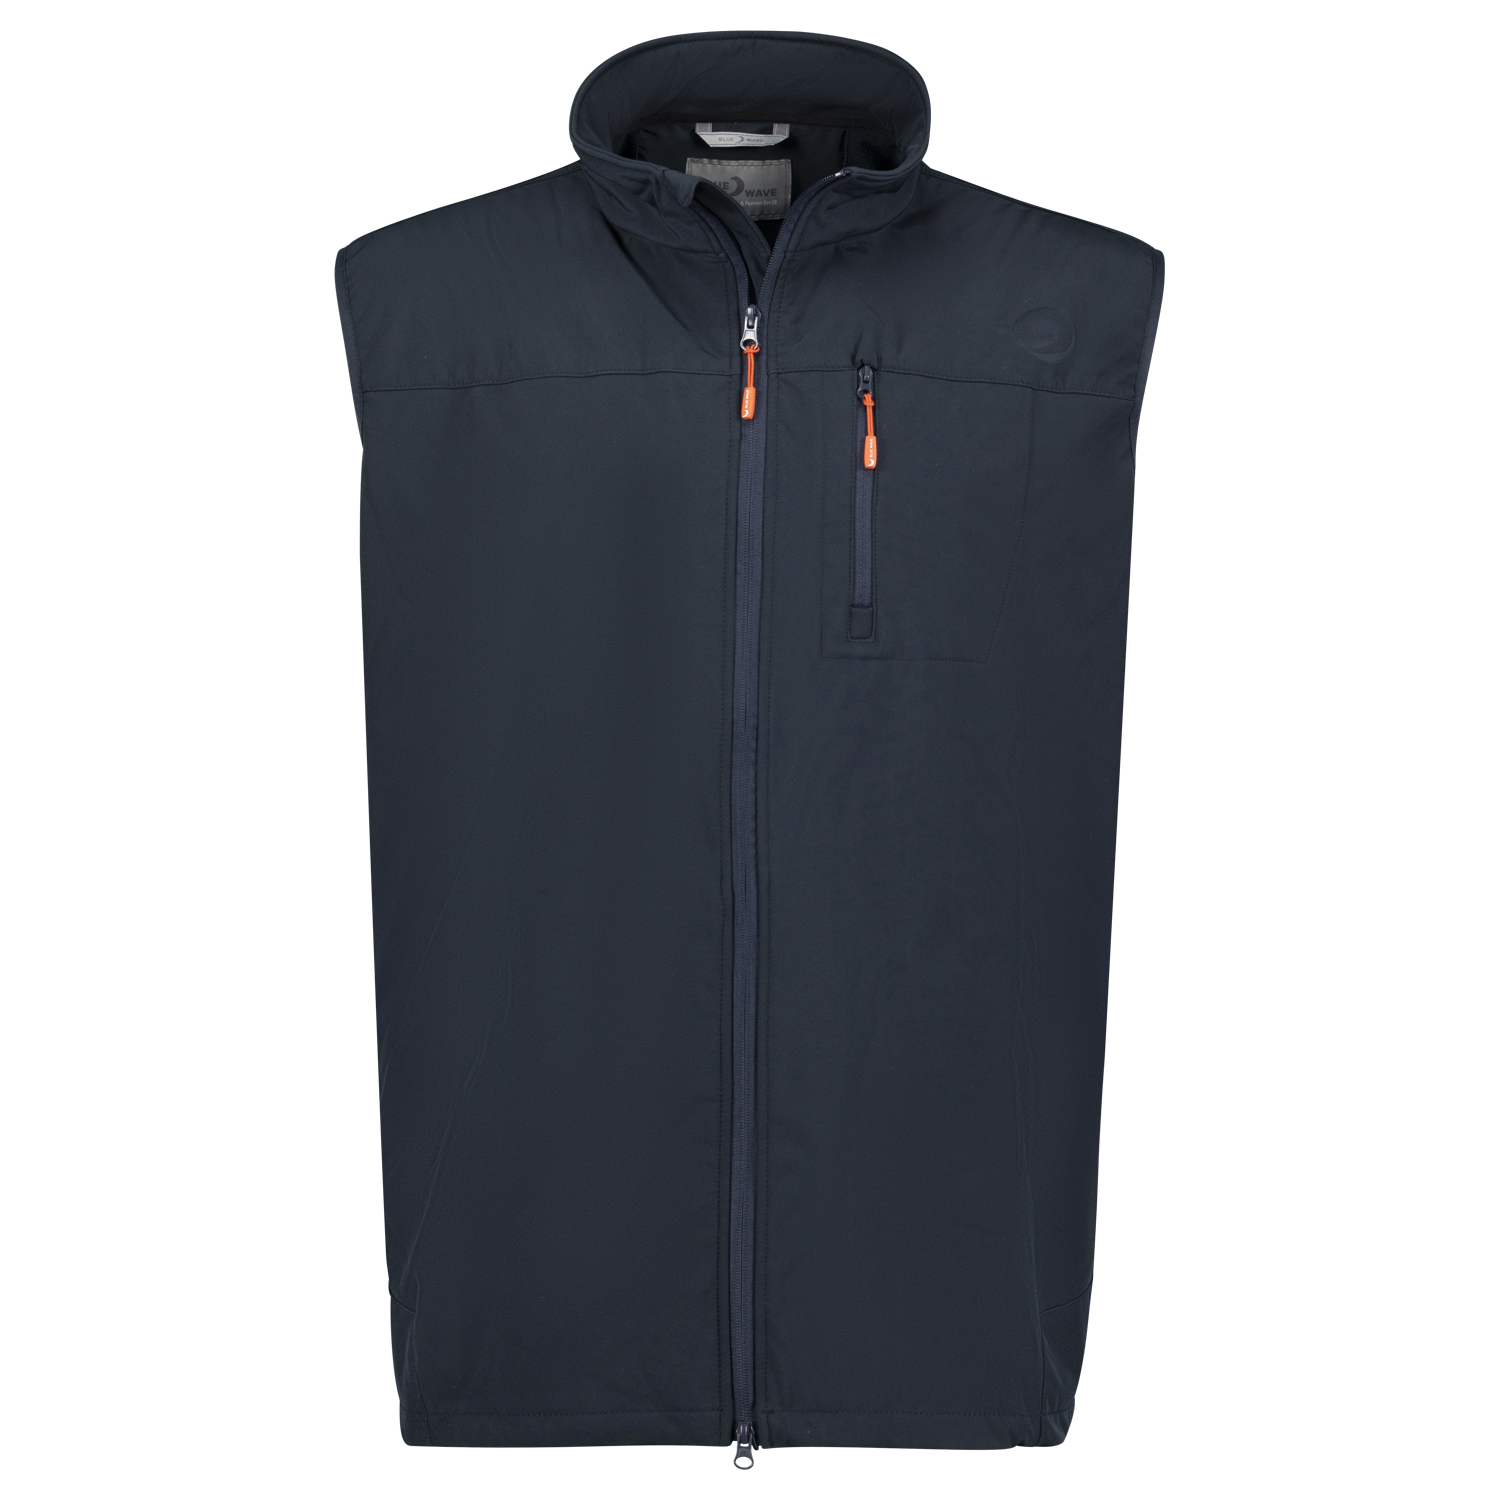 Softshell vest for men in navy by blue wave in plus sizes up to 10XL